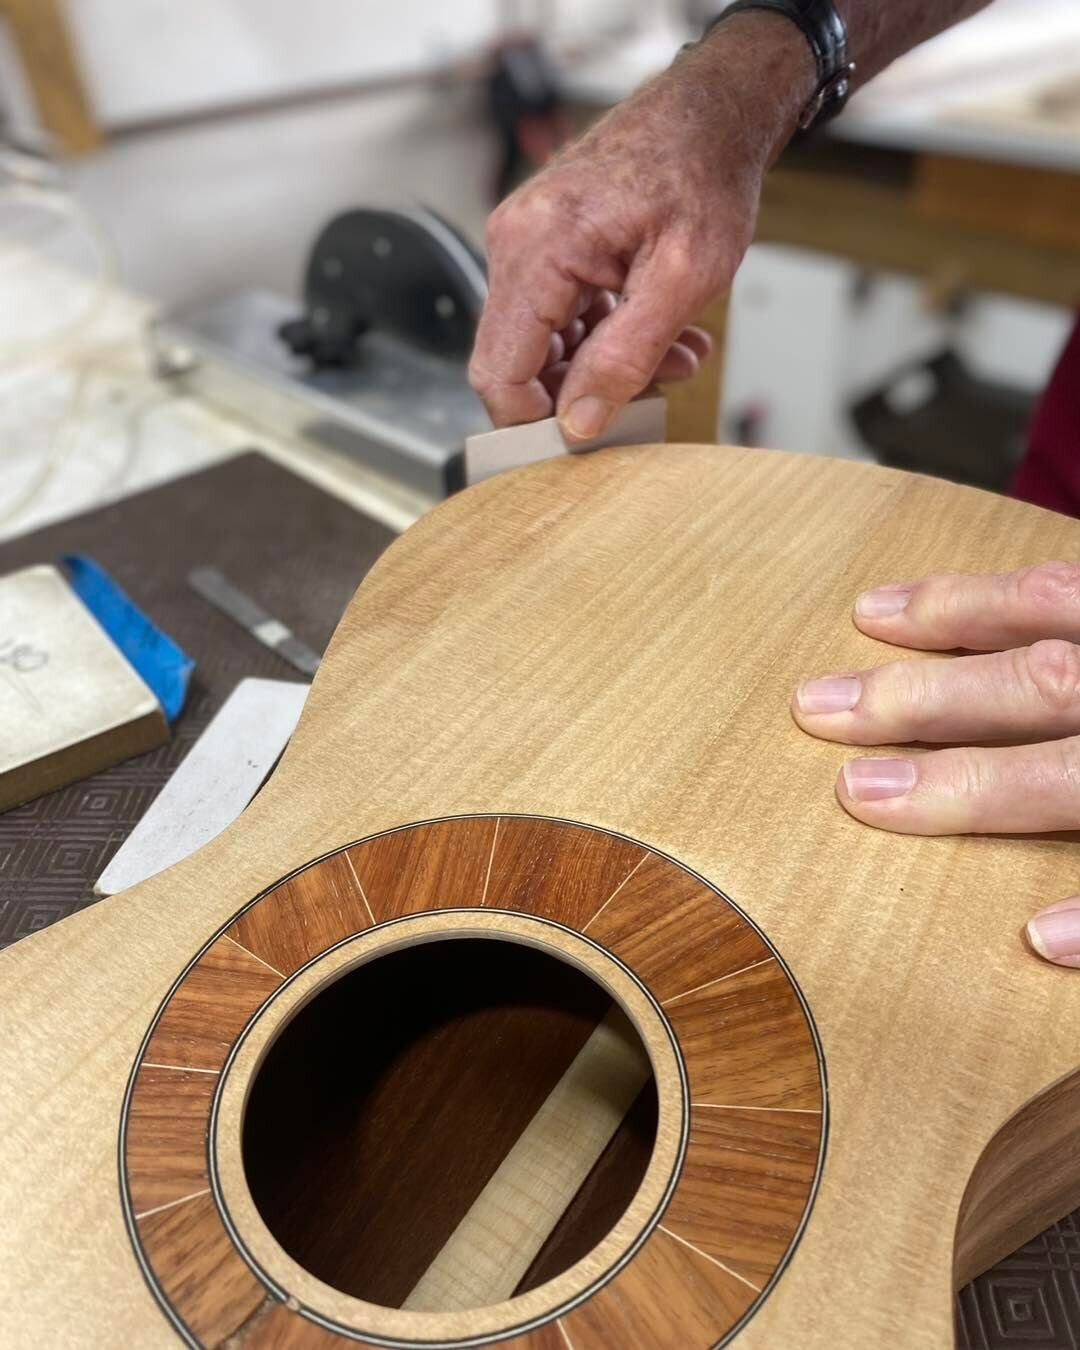 Gary fixing getting the edges just right. #sanding #lutherie #brisbane #handmade